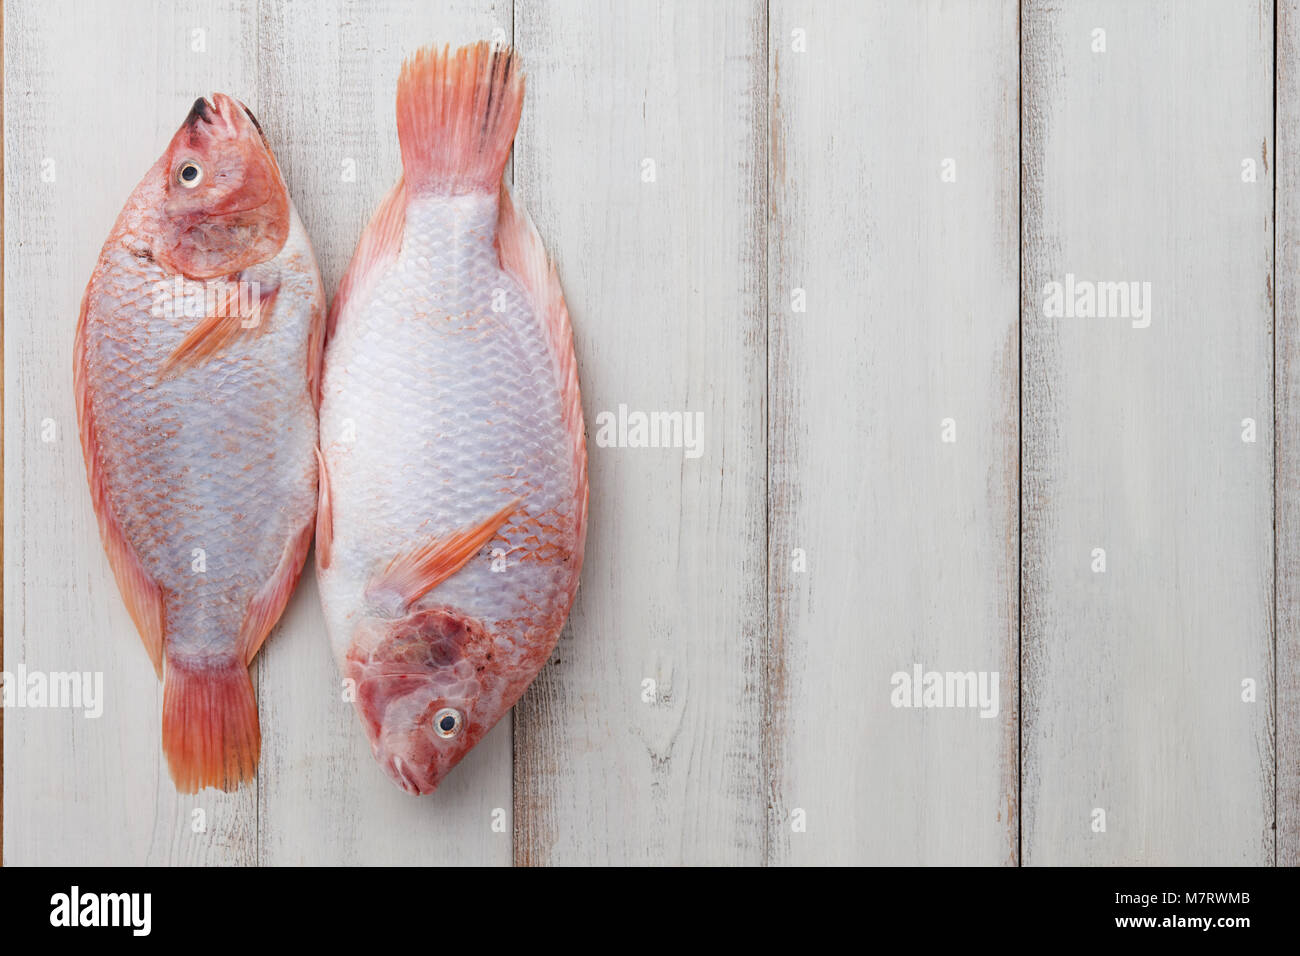 Peeled red tilapia on white wooden boards Stock Photo